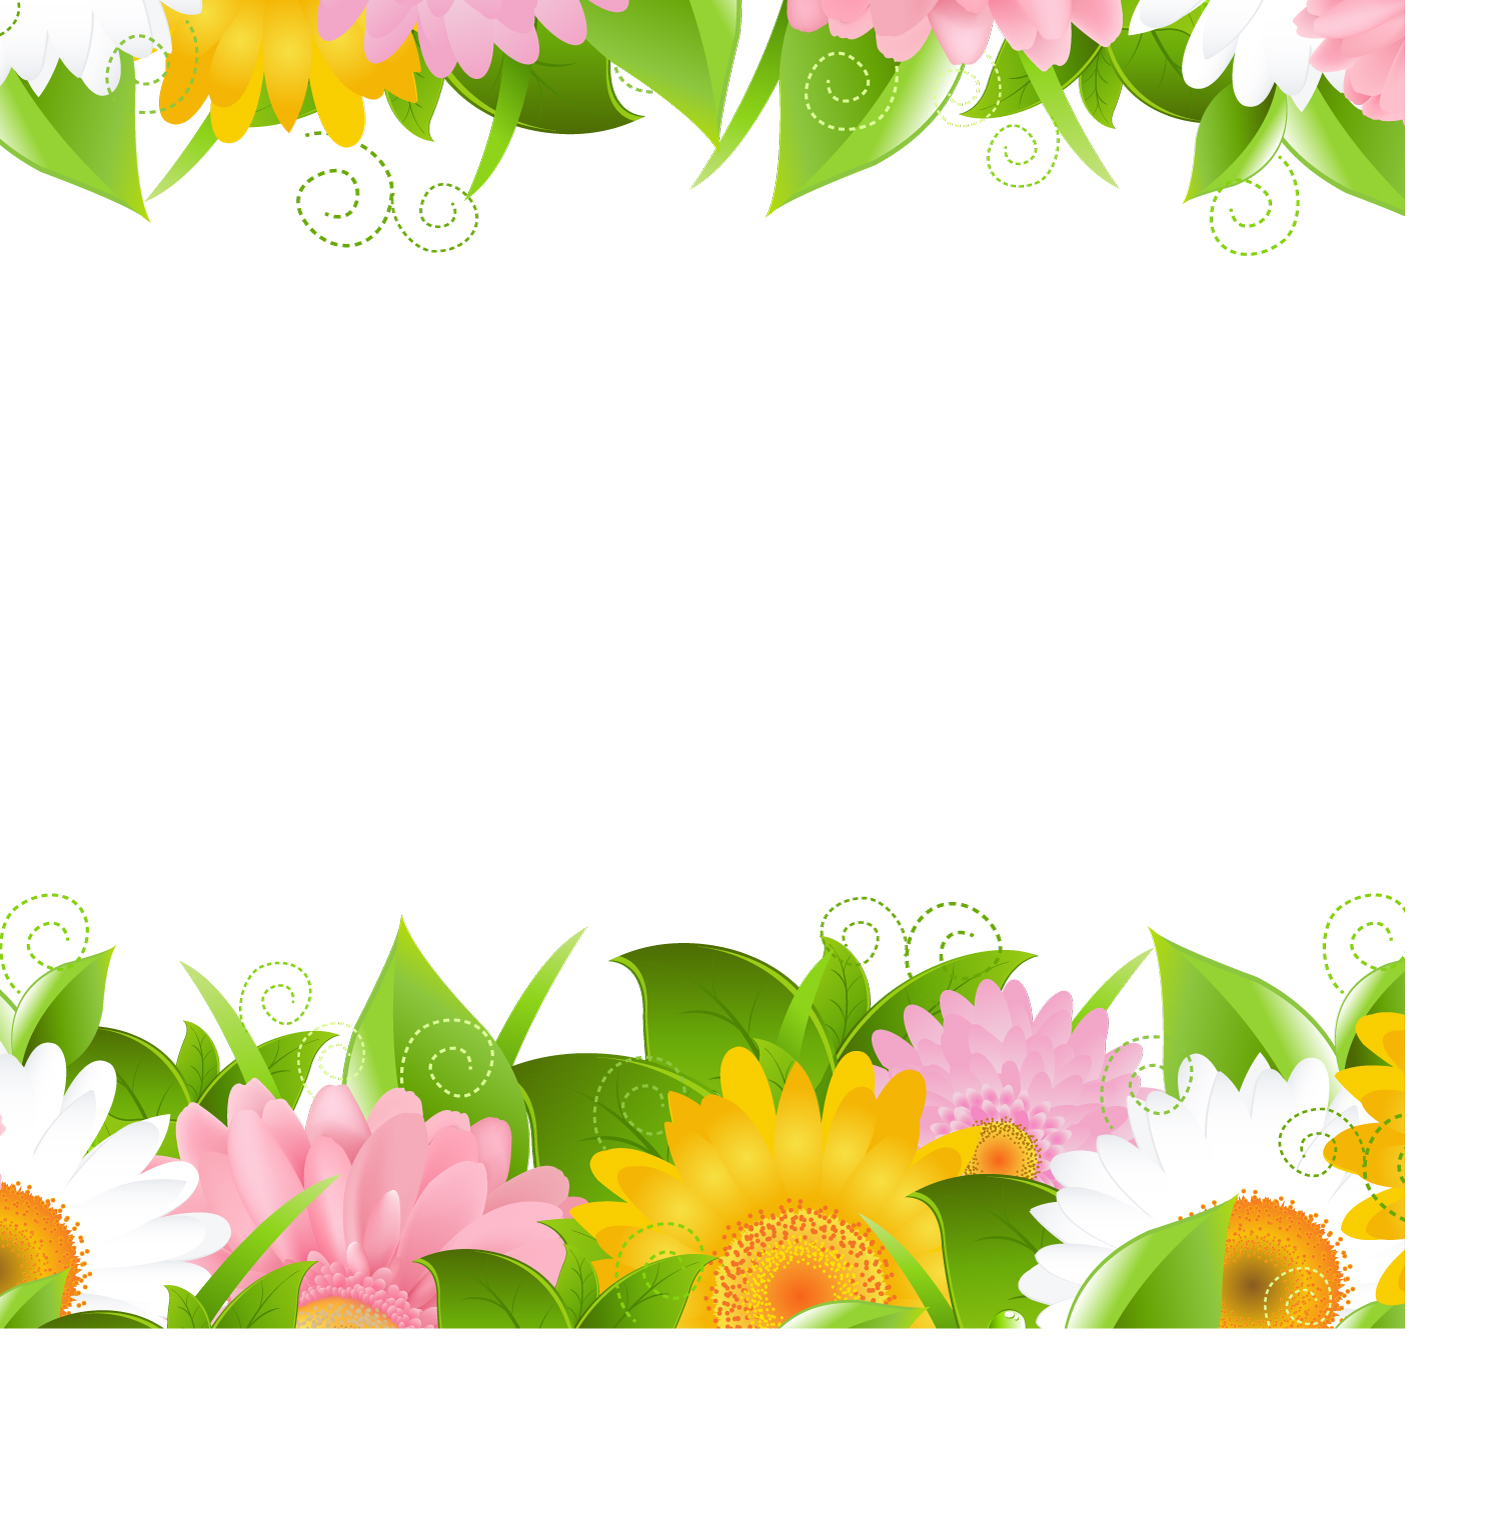 Flower background vector free download - various types of flower ...